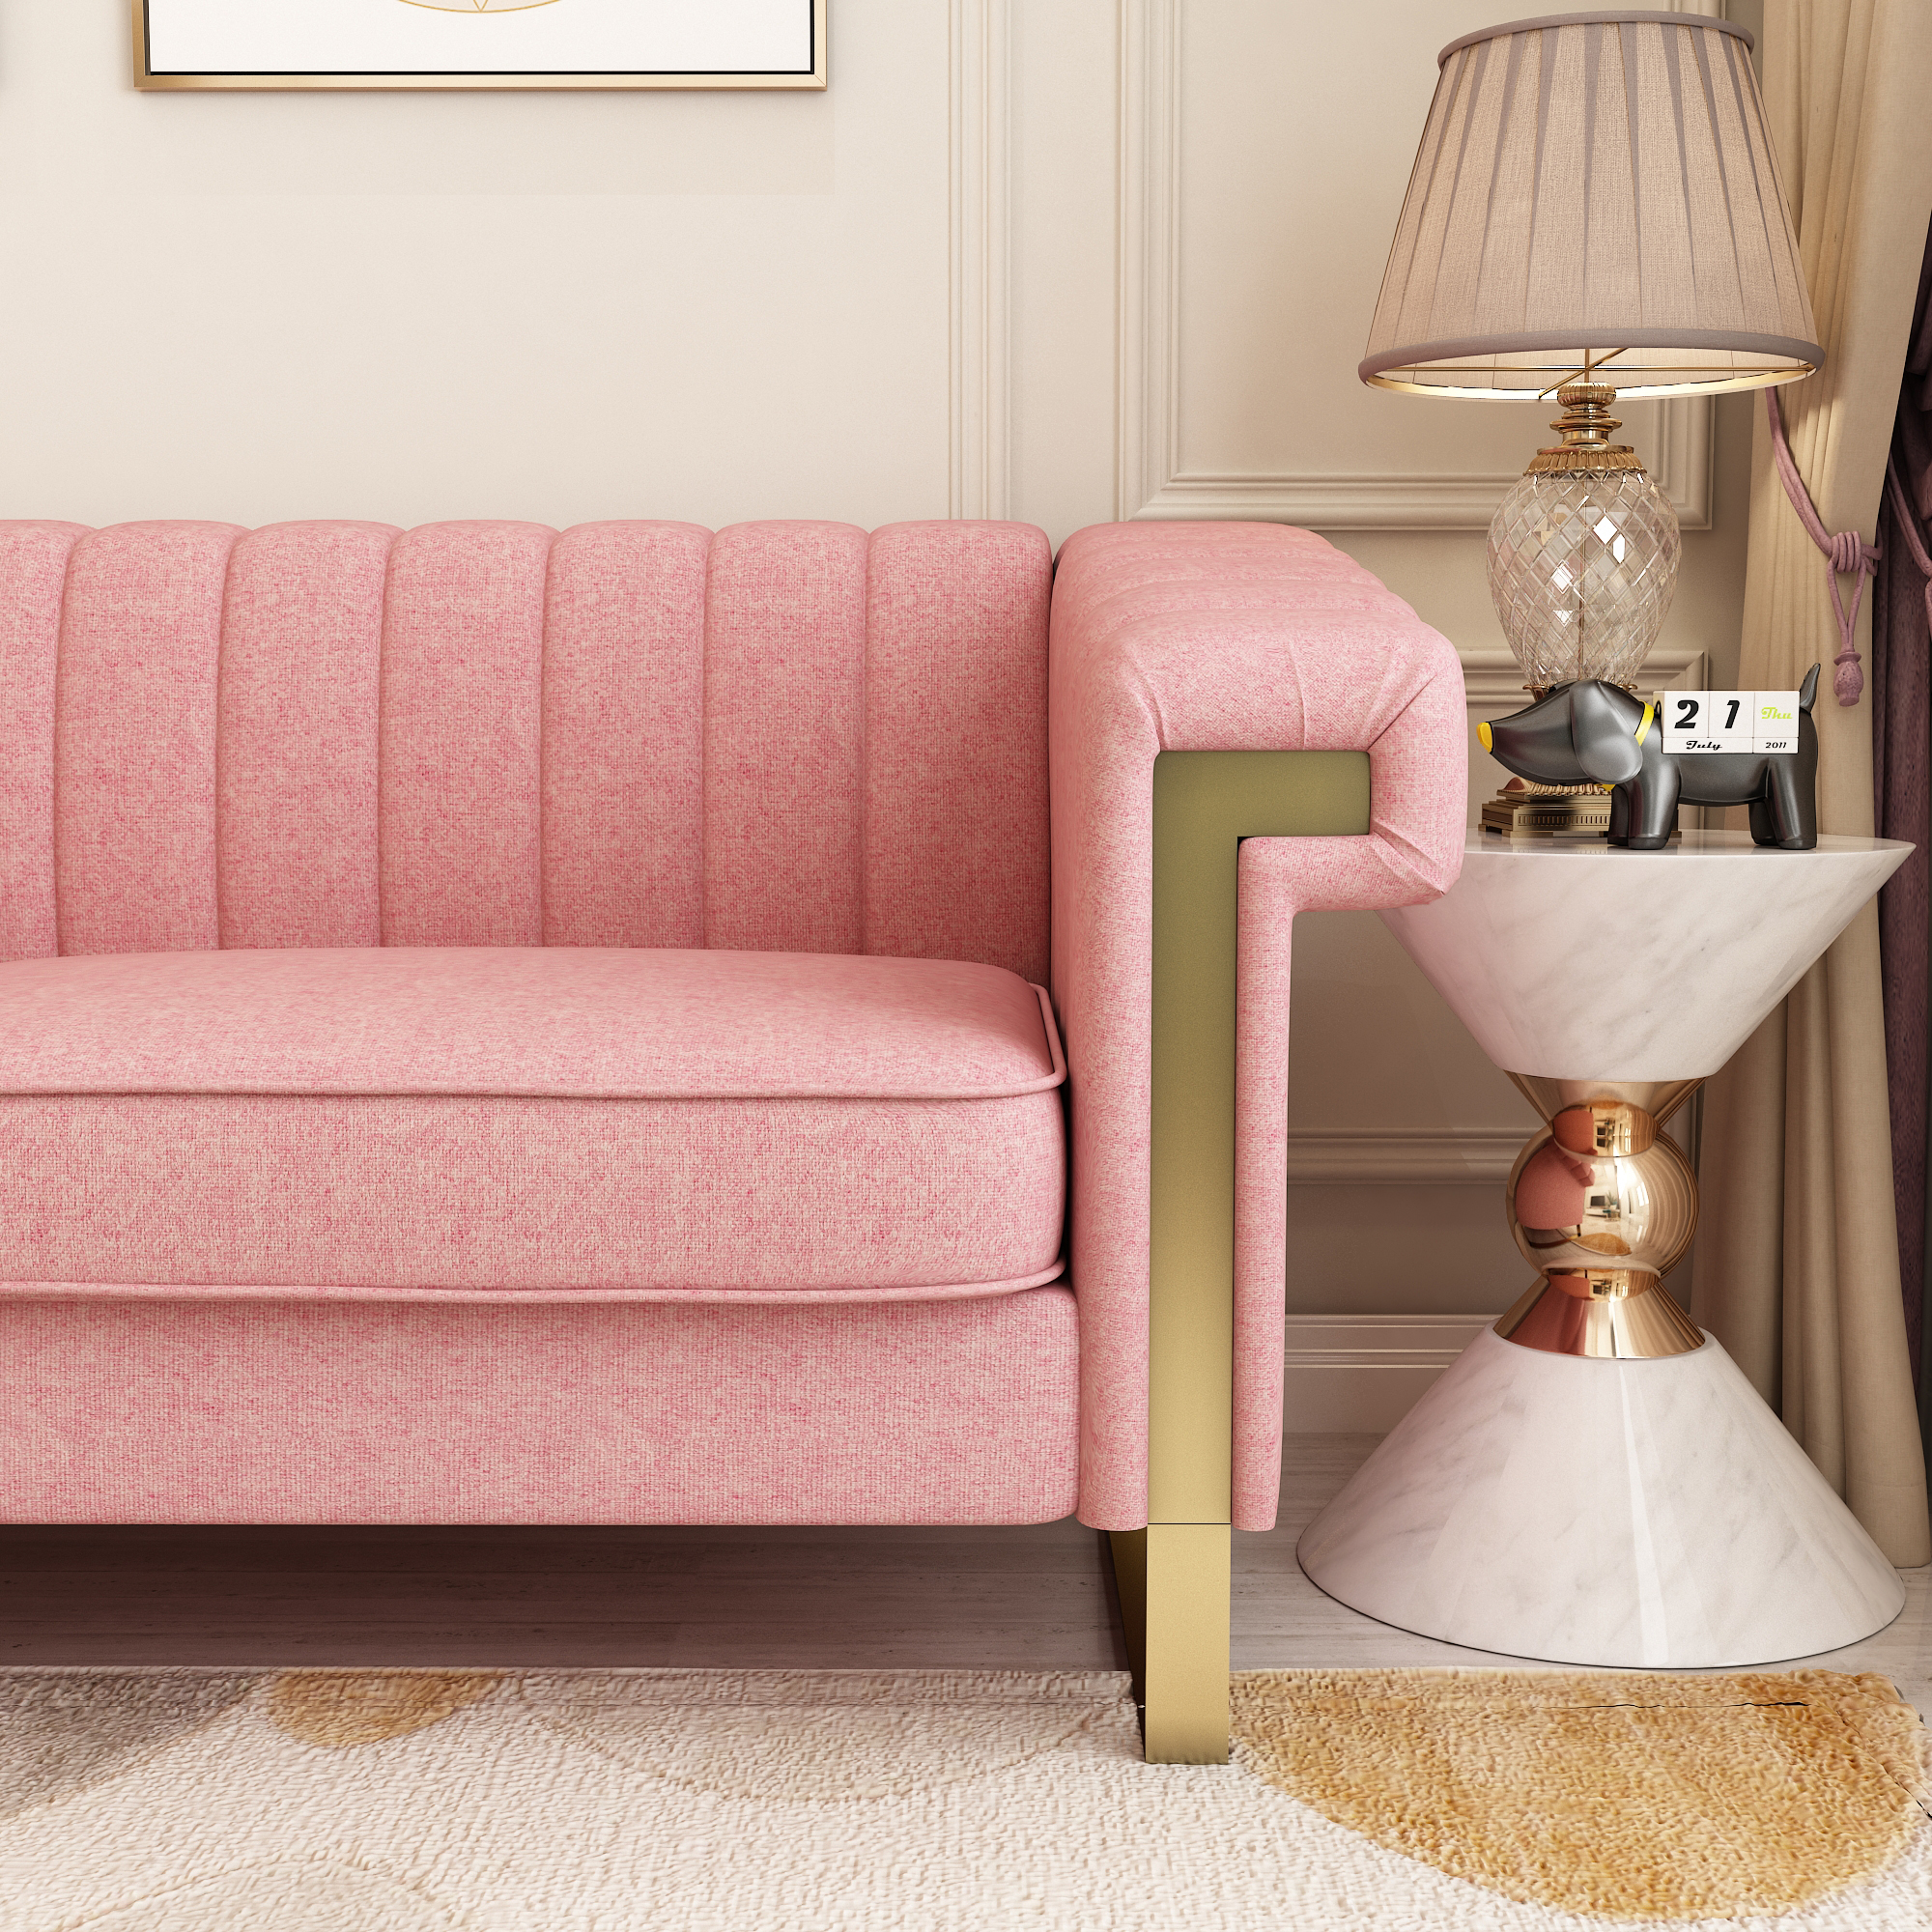 83.85 Inch Width Transitional Sofa  removable cushion FX-P81-PK pink color-Boyel Living